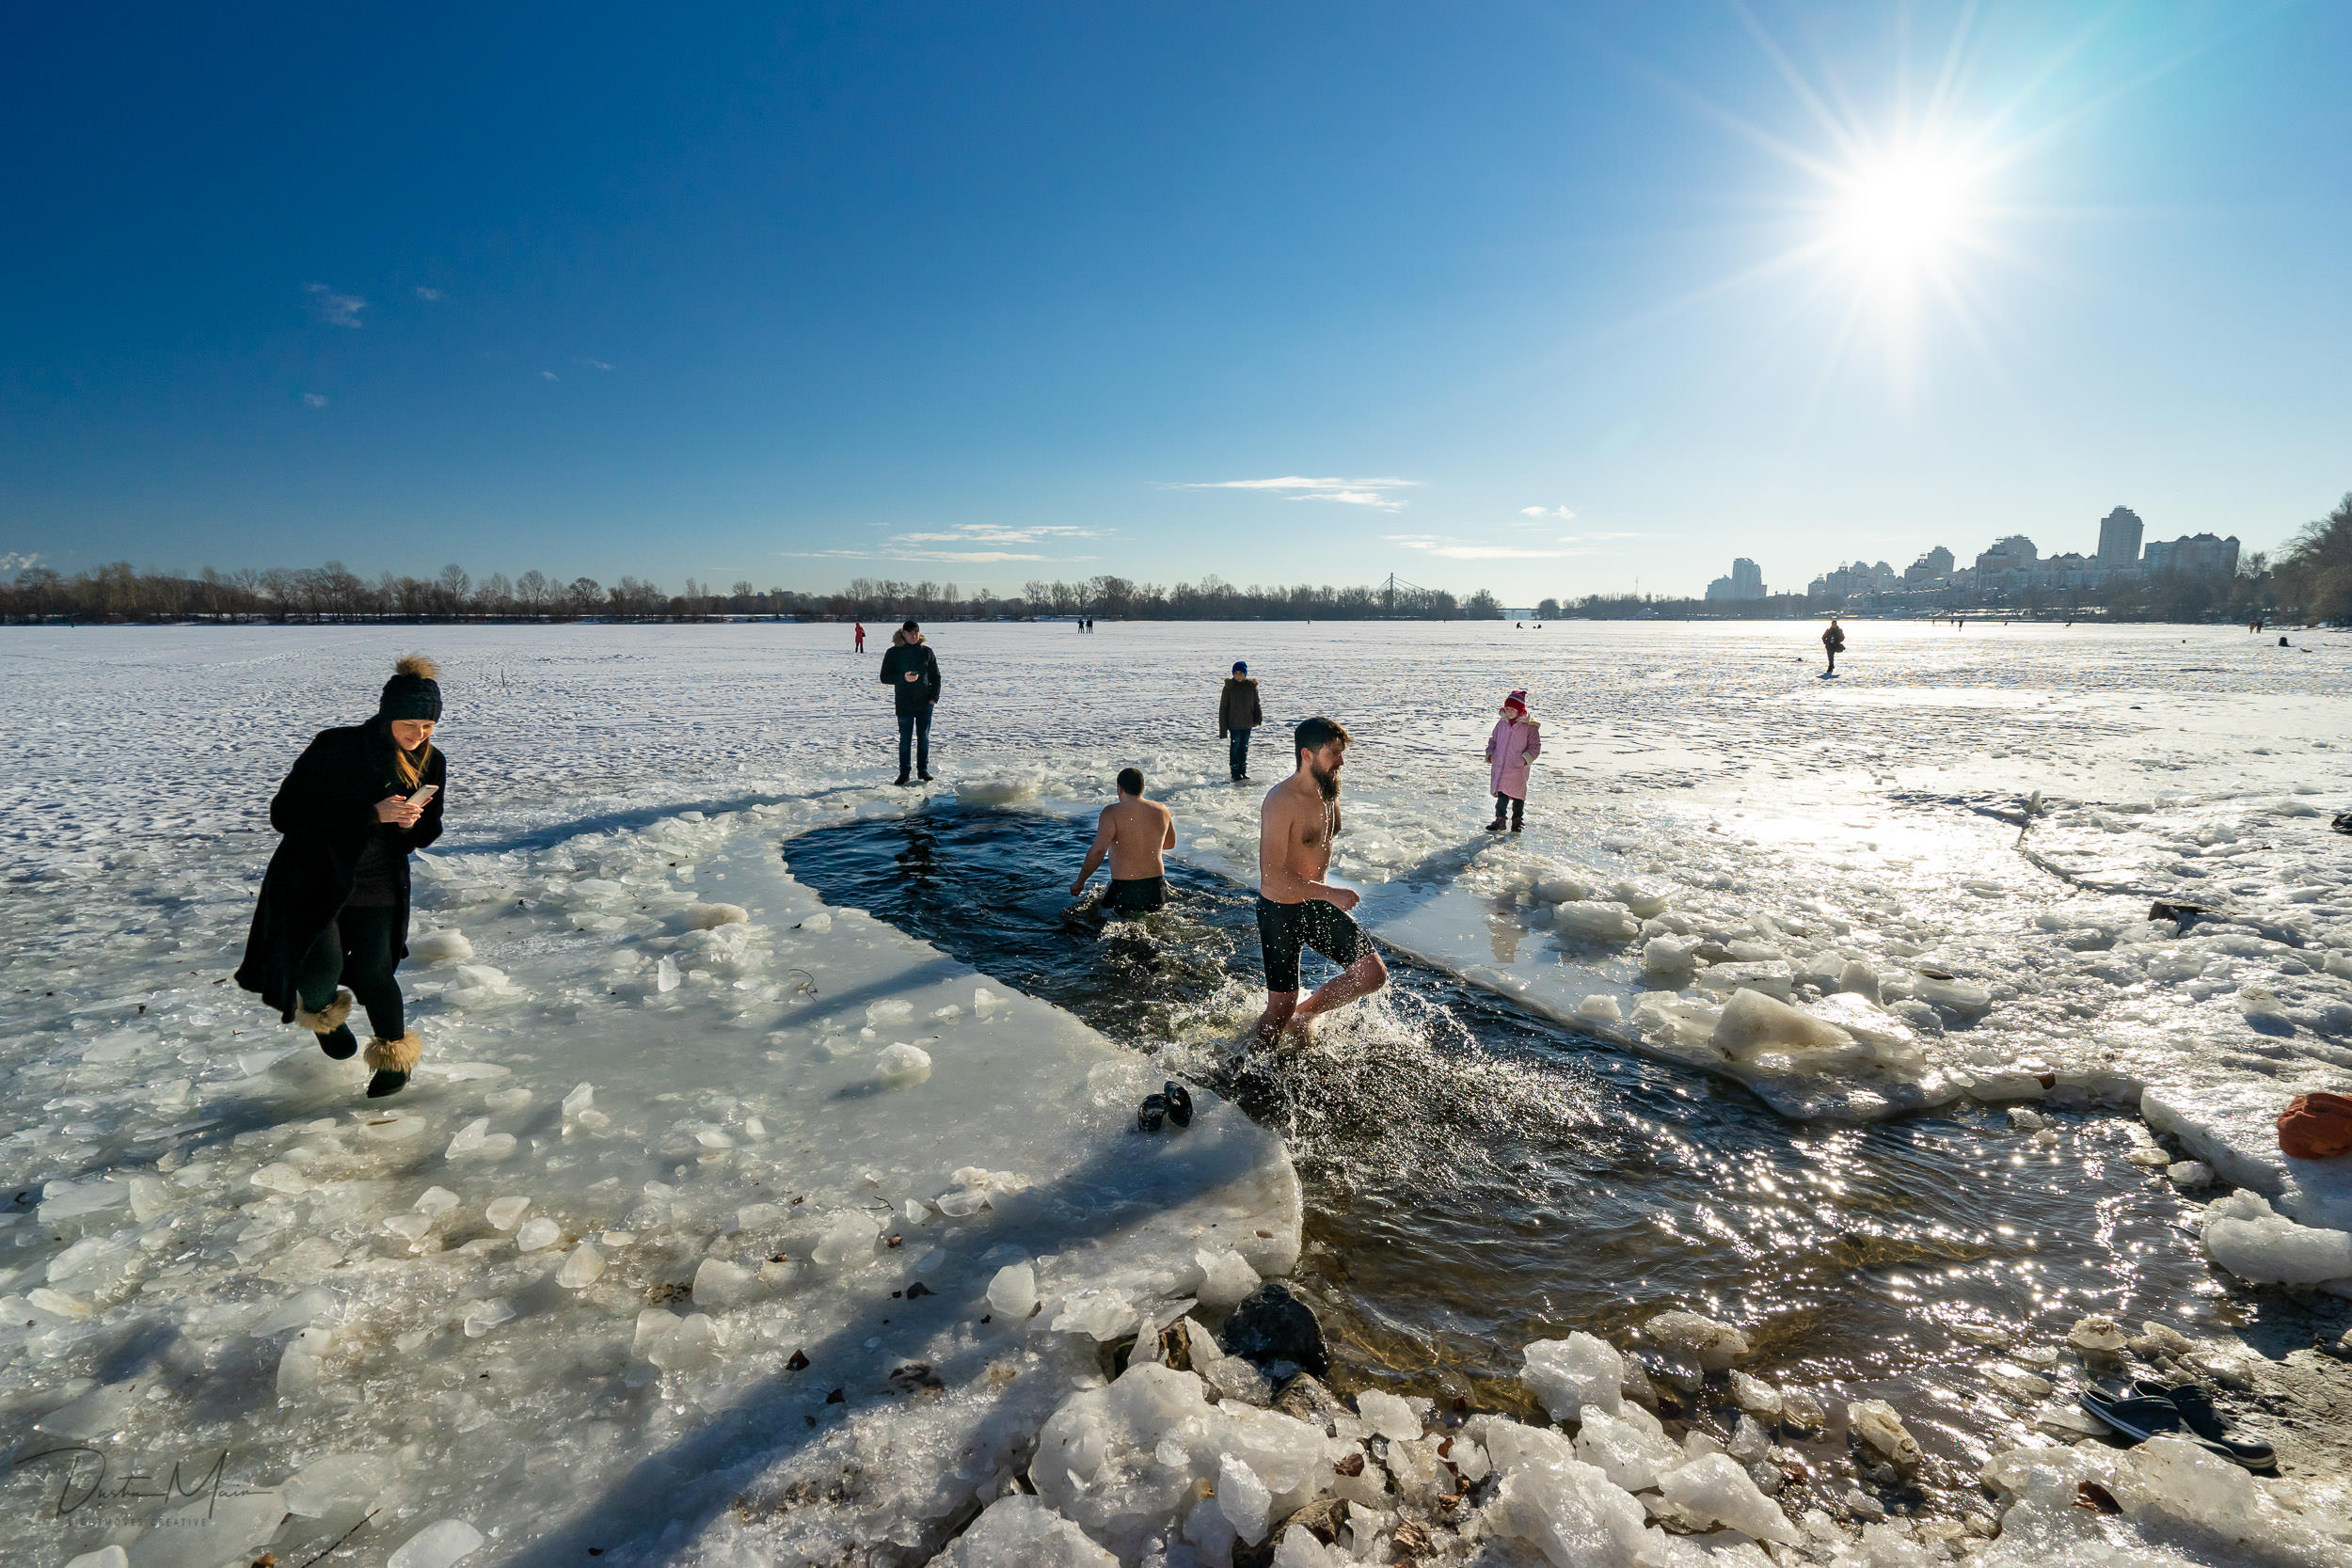  On and around the shore of the Dnieper river for Epiphany. © Dustin Main 2019 